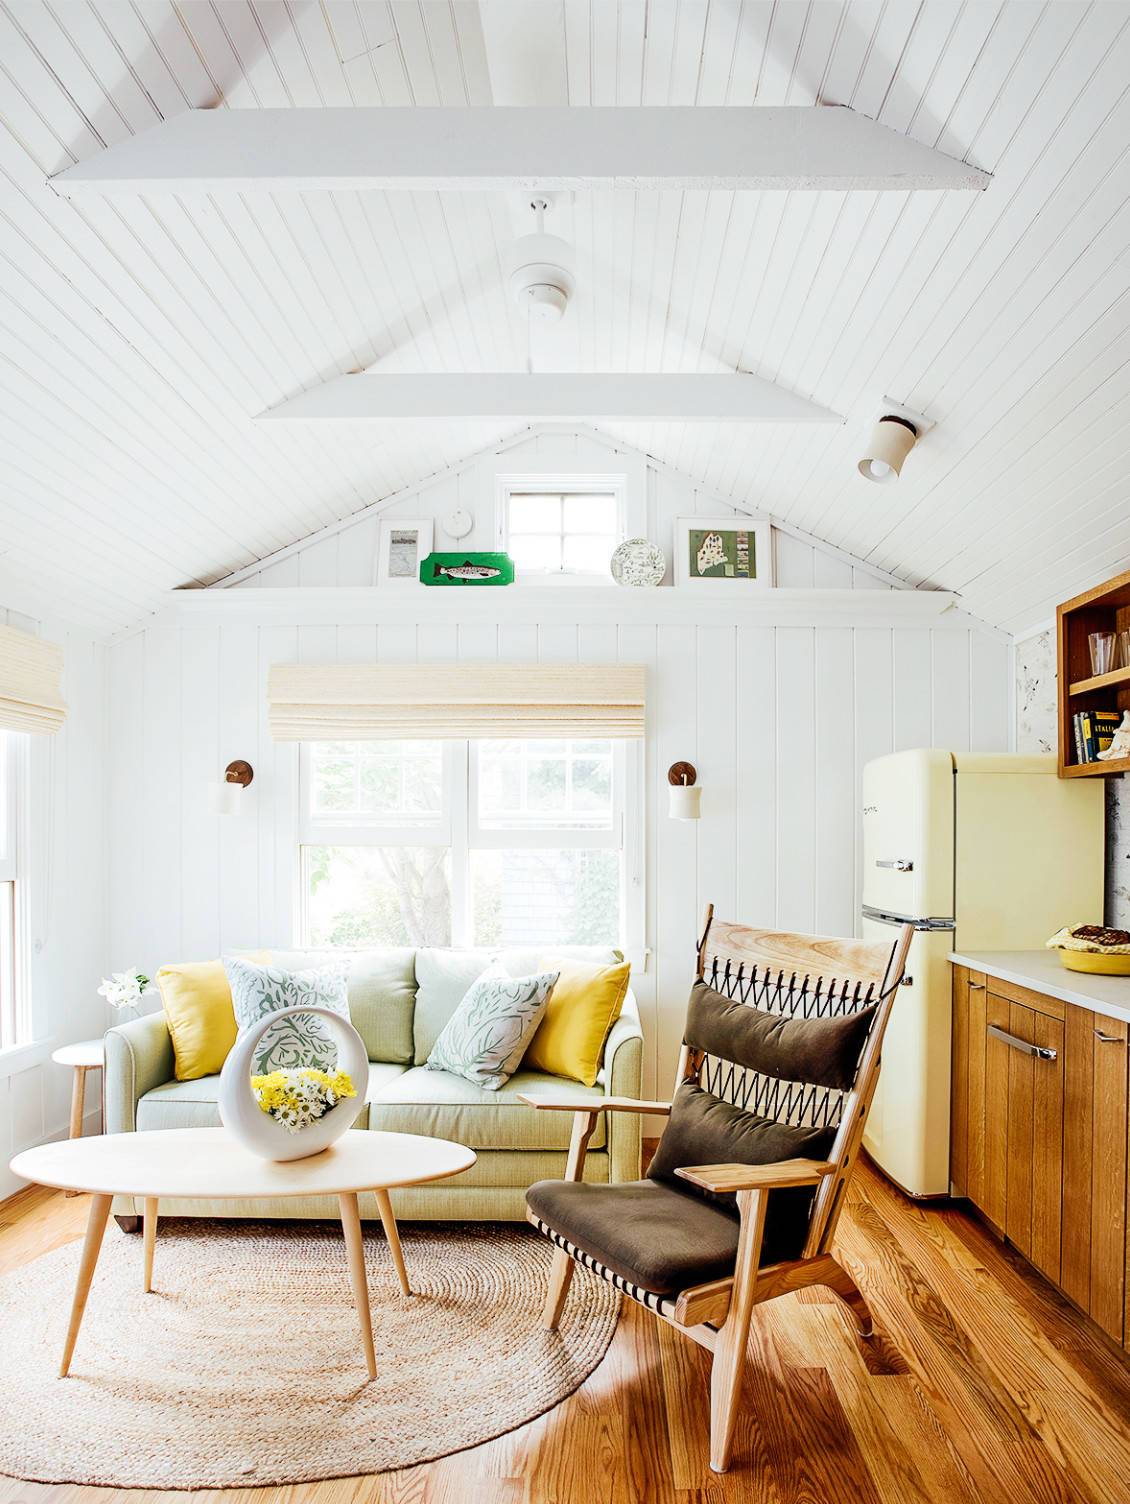 Tiny yet charming home (from Houzz)